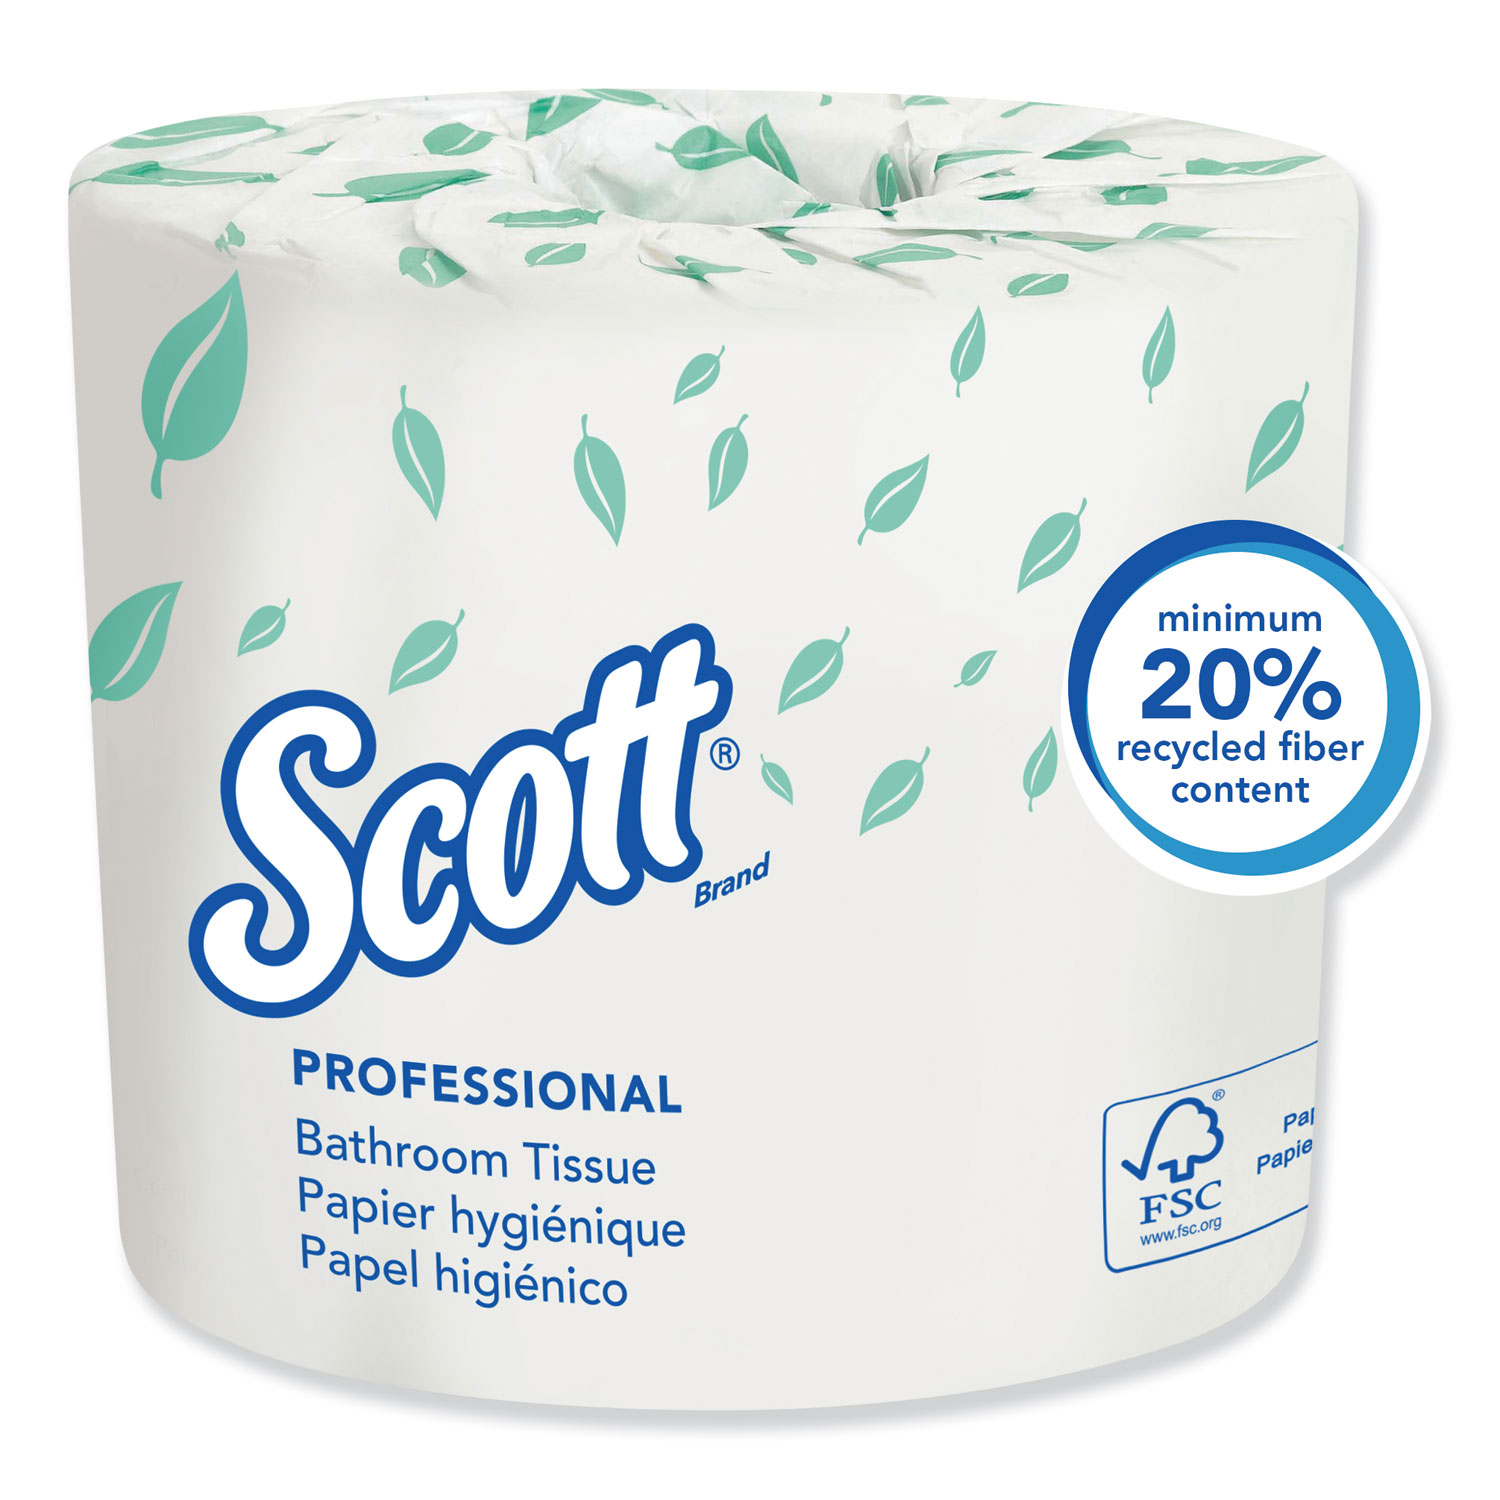 Essential Standard Roll Bathroom Tissue, Traditional, Septic Safe, 2 Ply, White, 550 Sheets/Roll, 20 Rolls/Carton